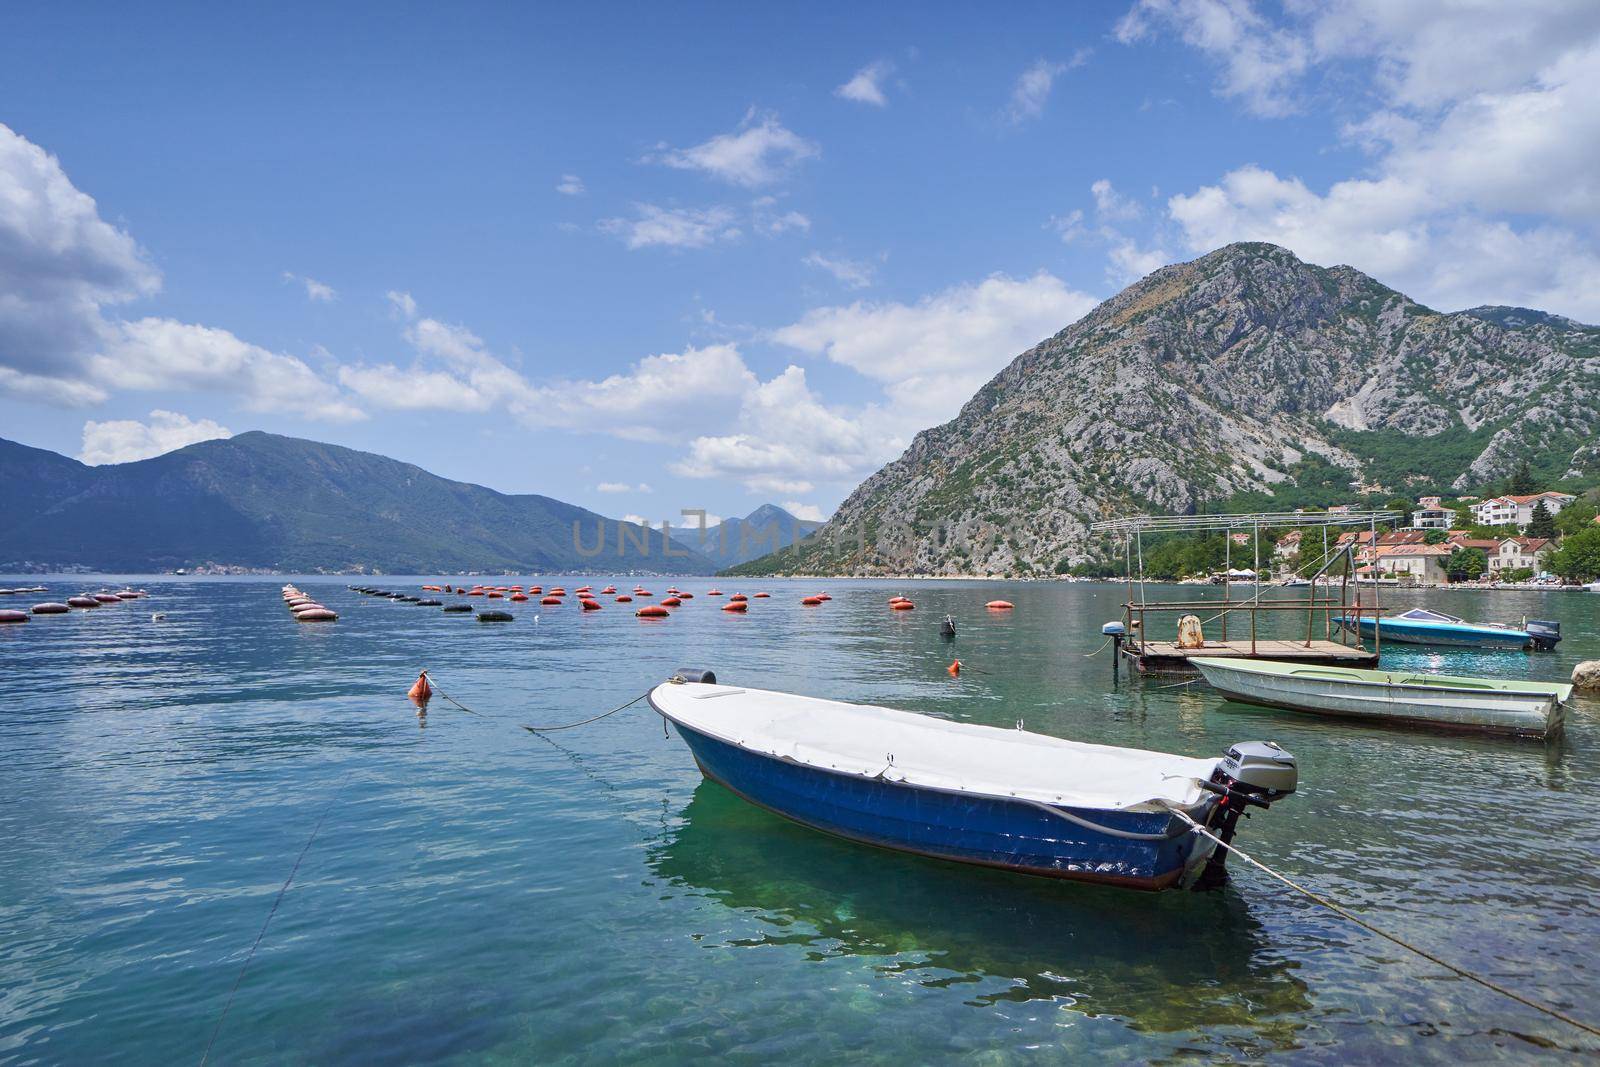 Fishing boat on the background of oyster farms and mountains in the Adiatic Sea, Montenegro.